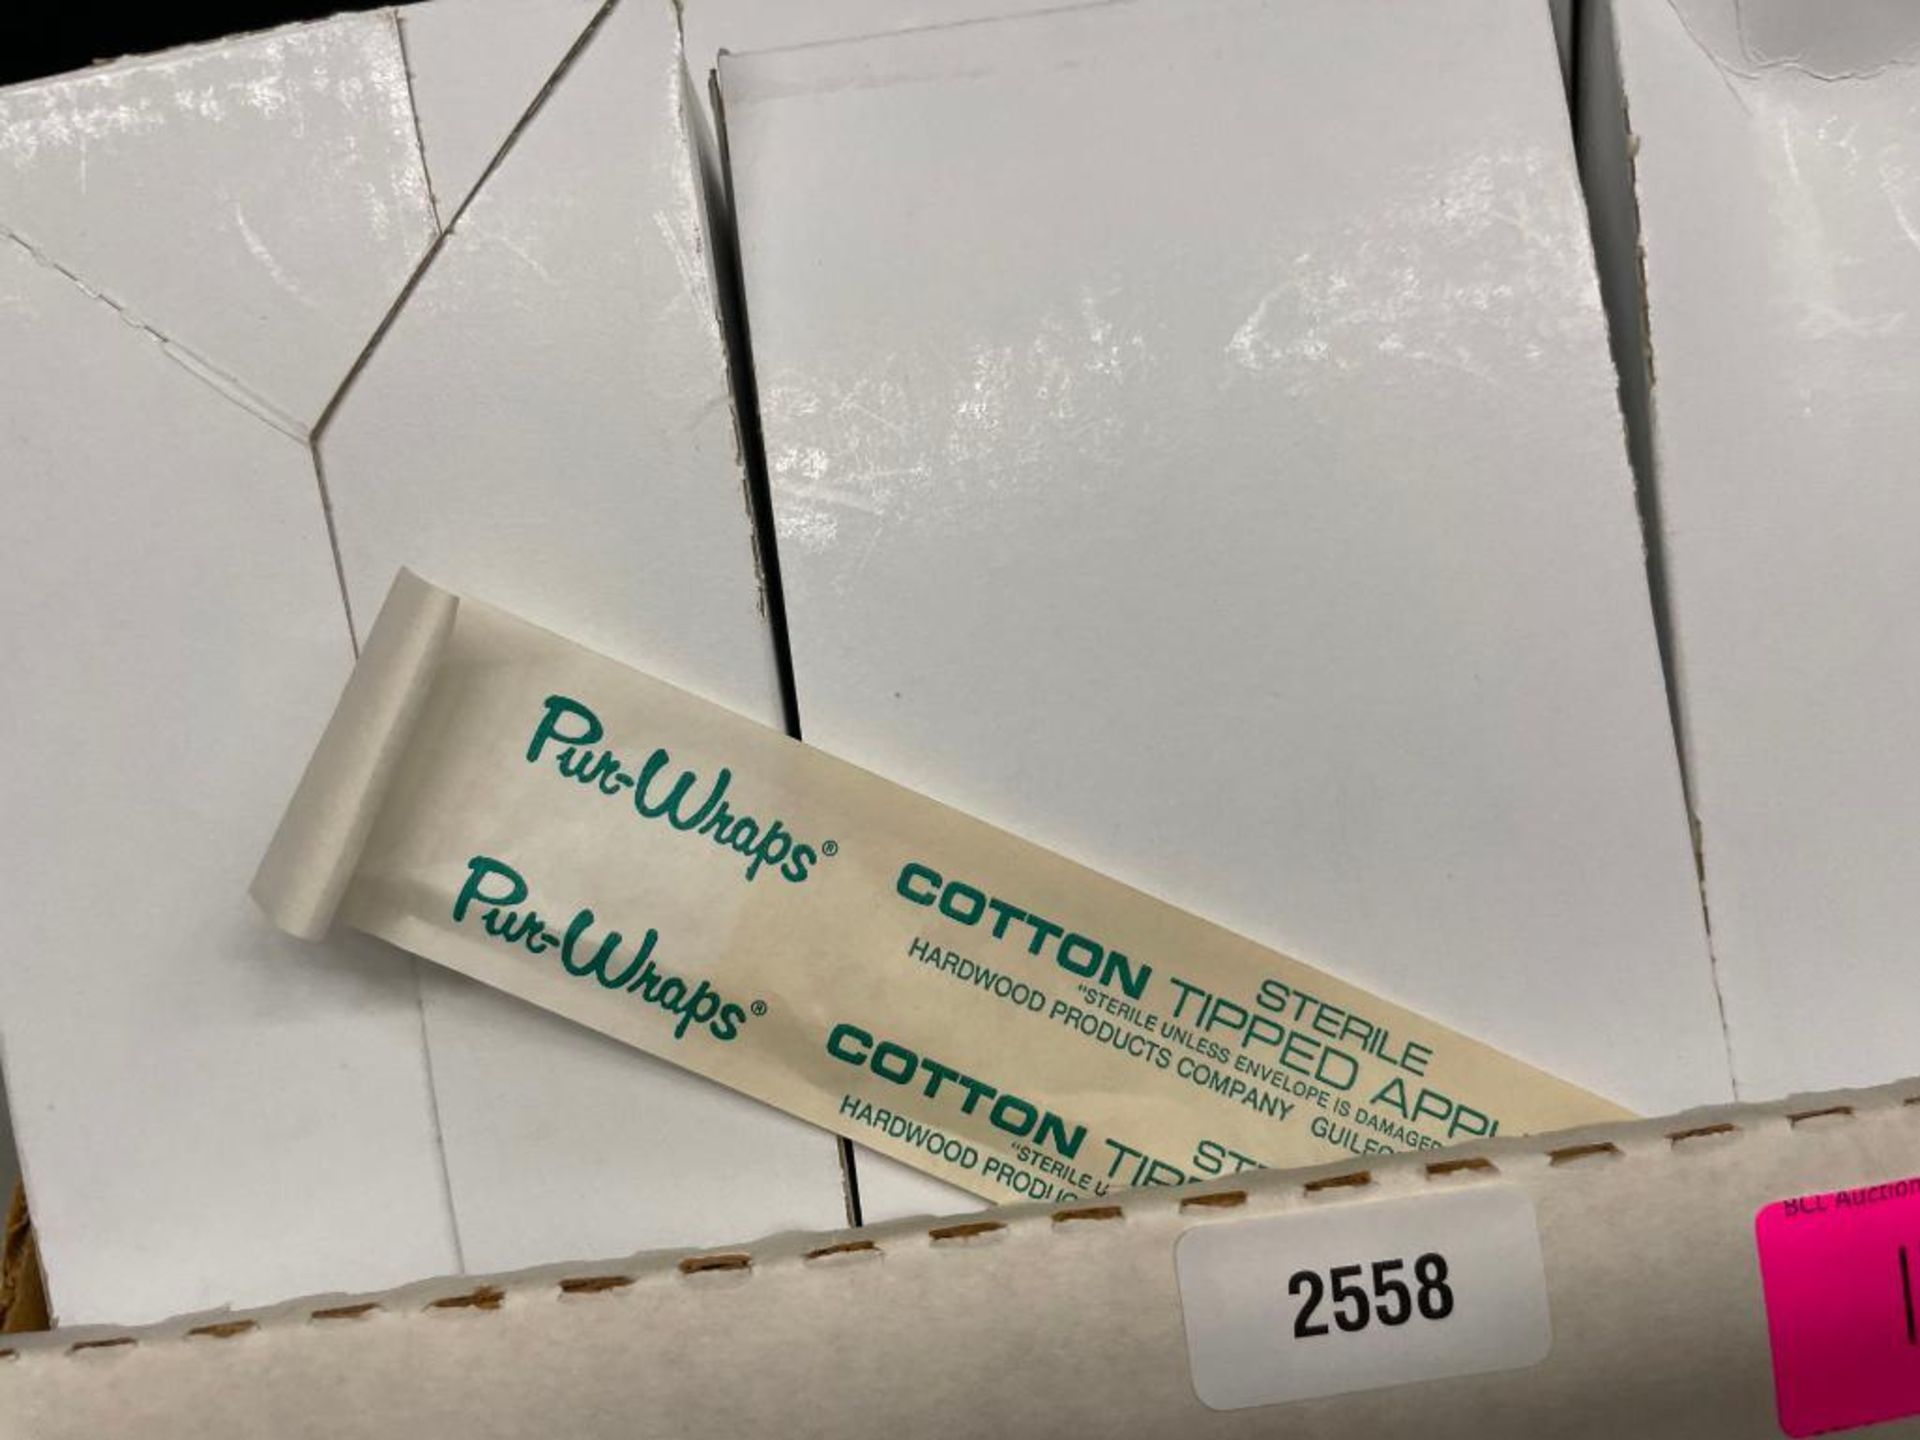 STERILE COTTON-TIPPED APPLICATORS BRAND/MODEL: HARDWOOD PRODUCTS QTY: 1 - Image 3 of 3